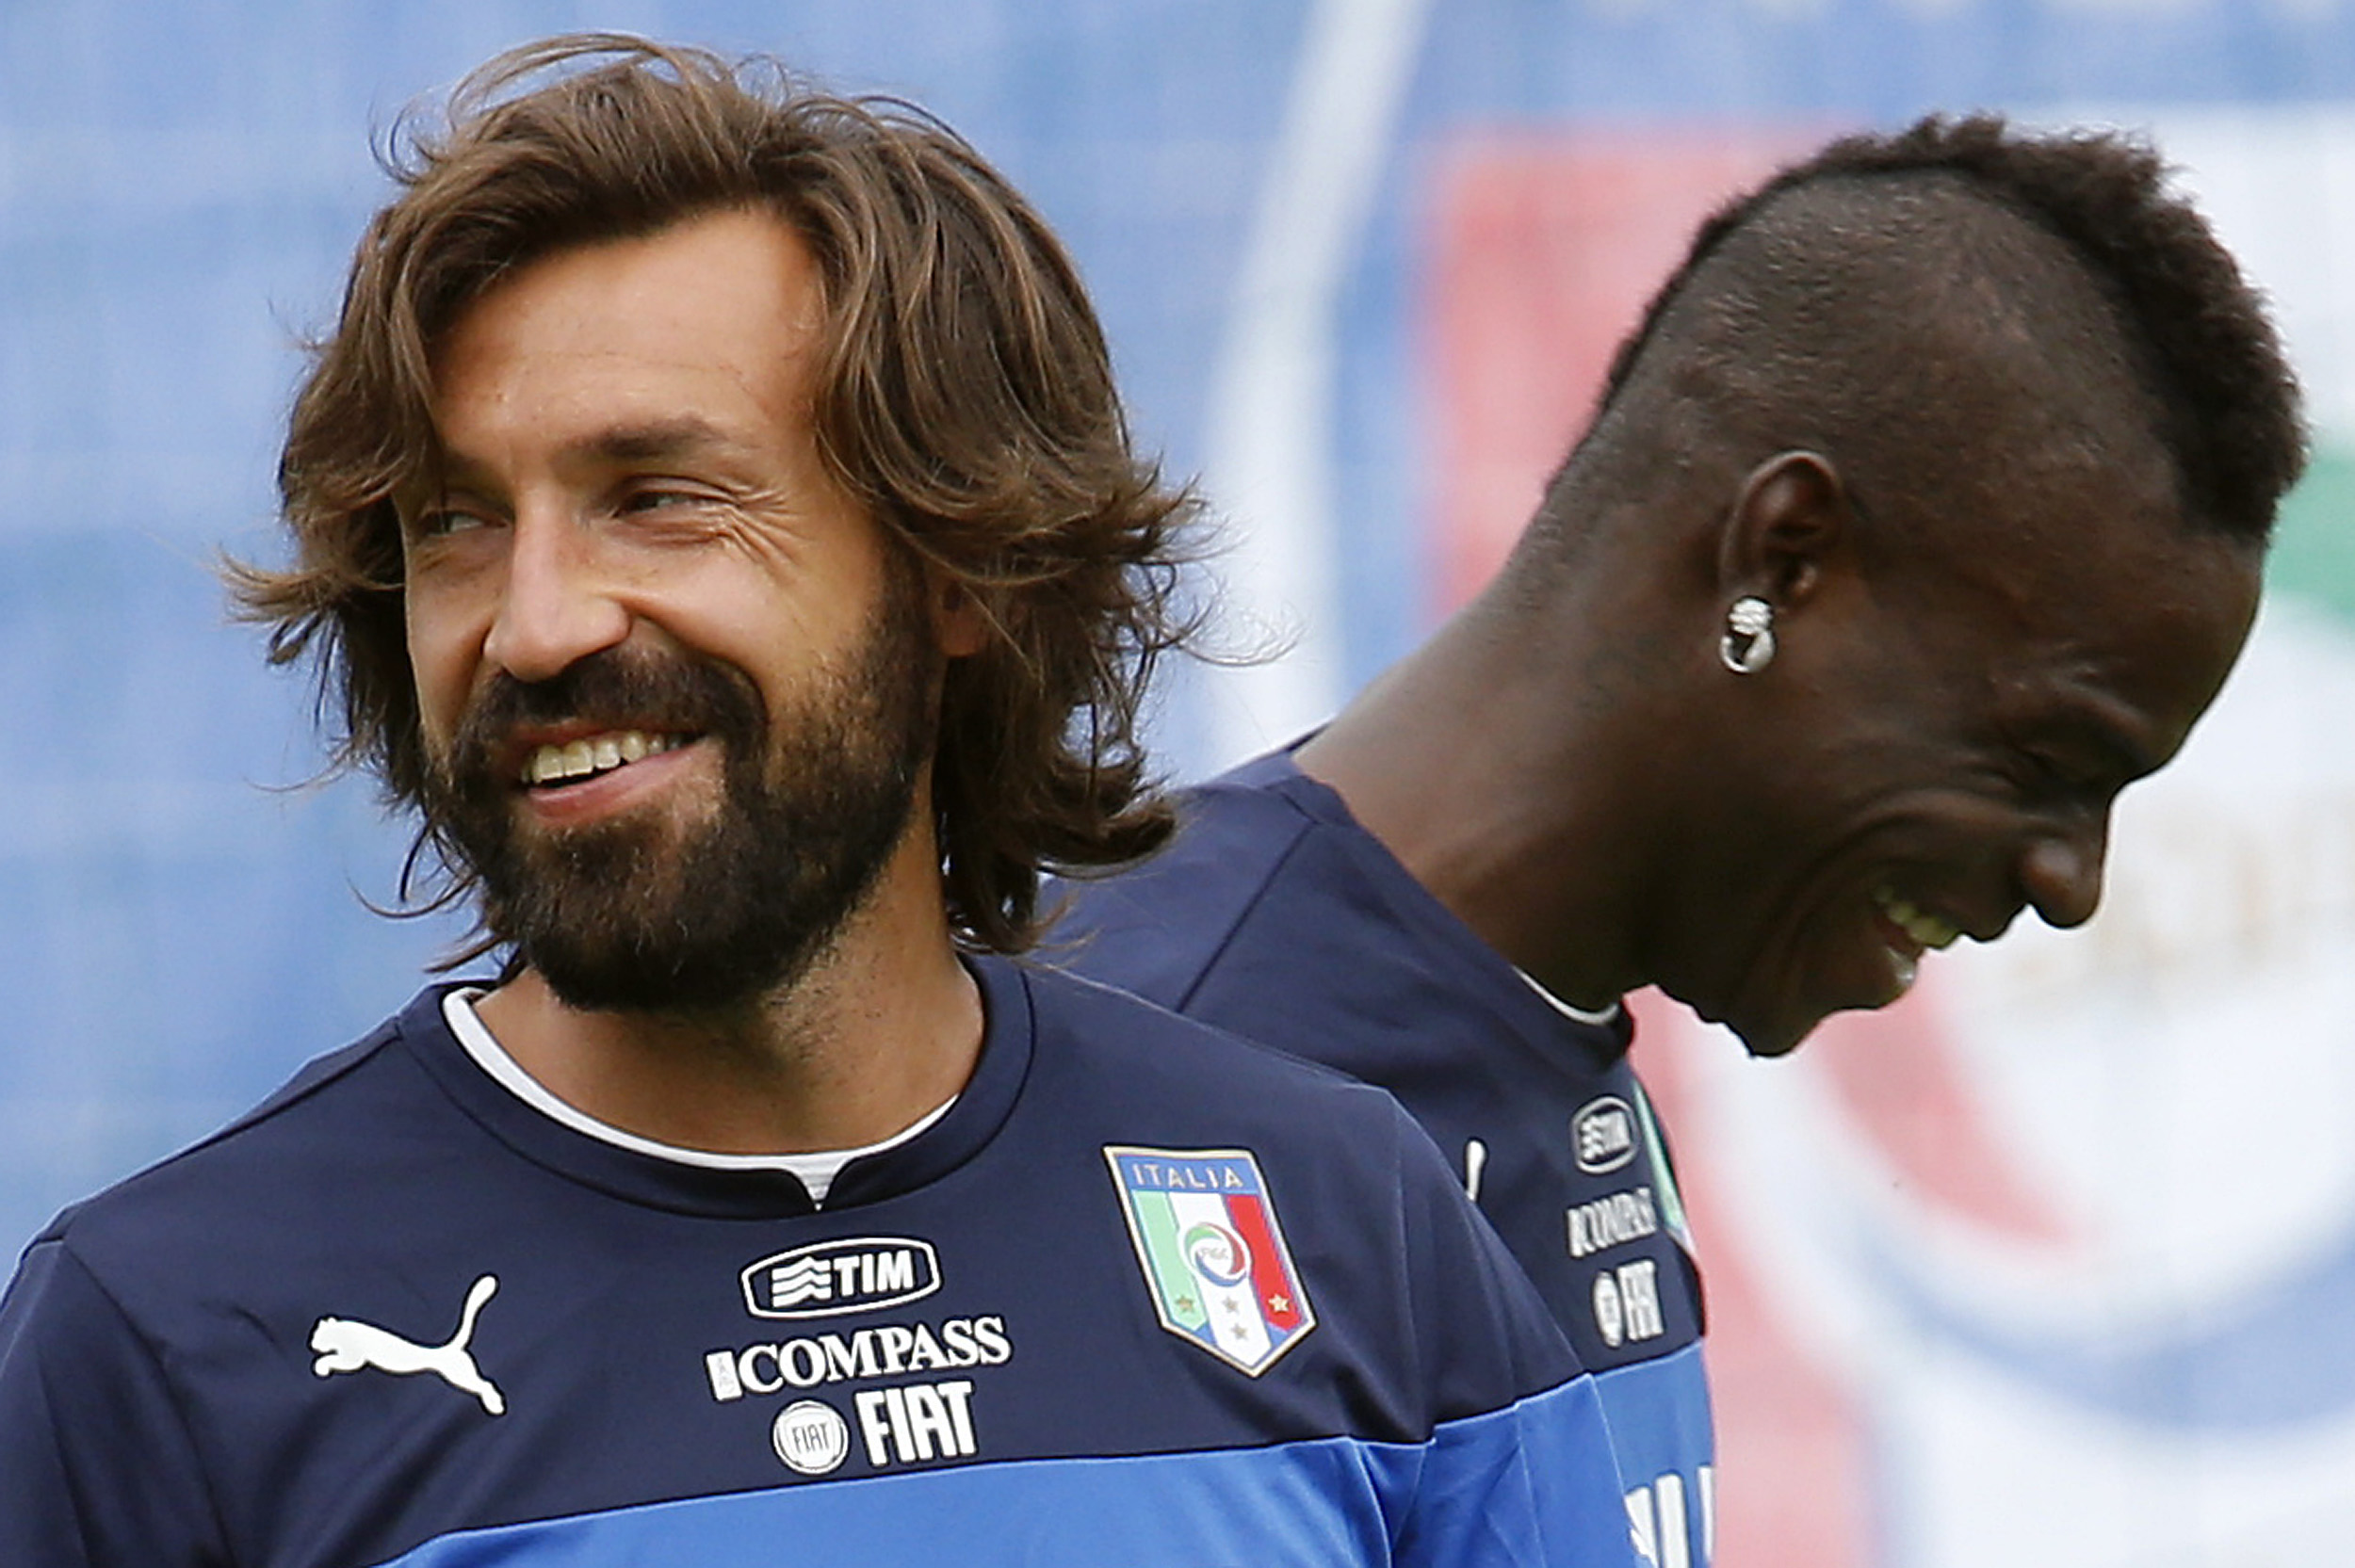 Italy's national soccer players Andrea Pirlo and Mario Balotelli (R) smile during a training session ahead of the 2014 World Cup at the Portobello training center in Mangaratiba June 11, 2014.  REUTERS/Alessandro Garofalo (BRAZIL  - Tags: SPORT SOCCER WOR